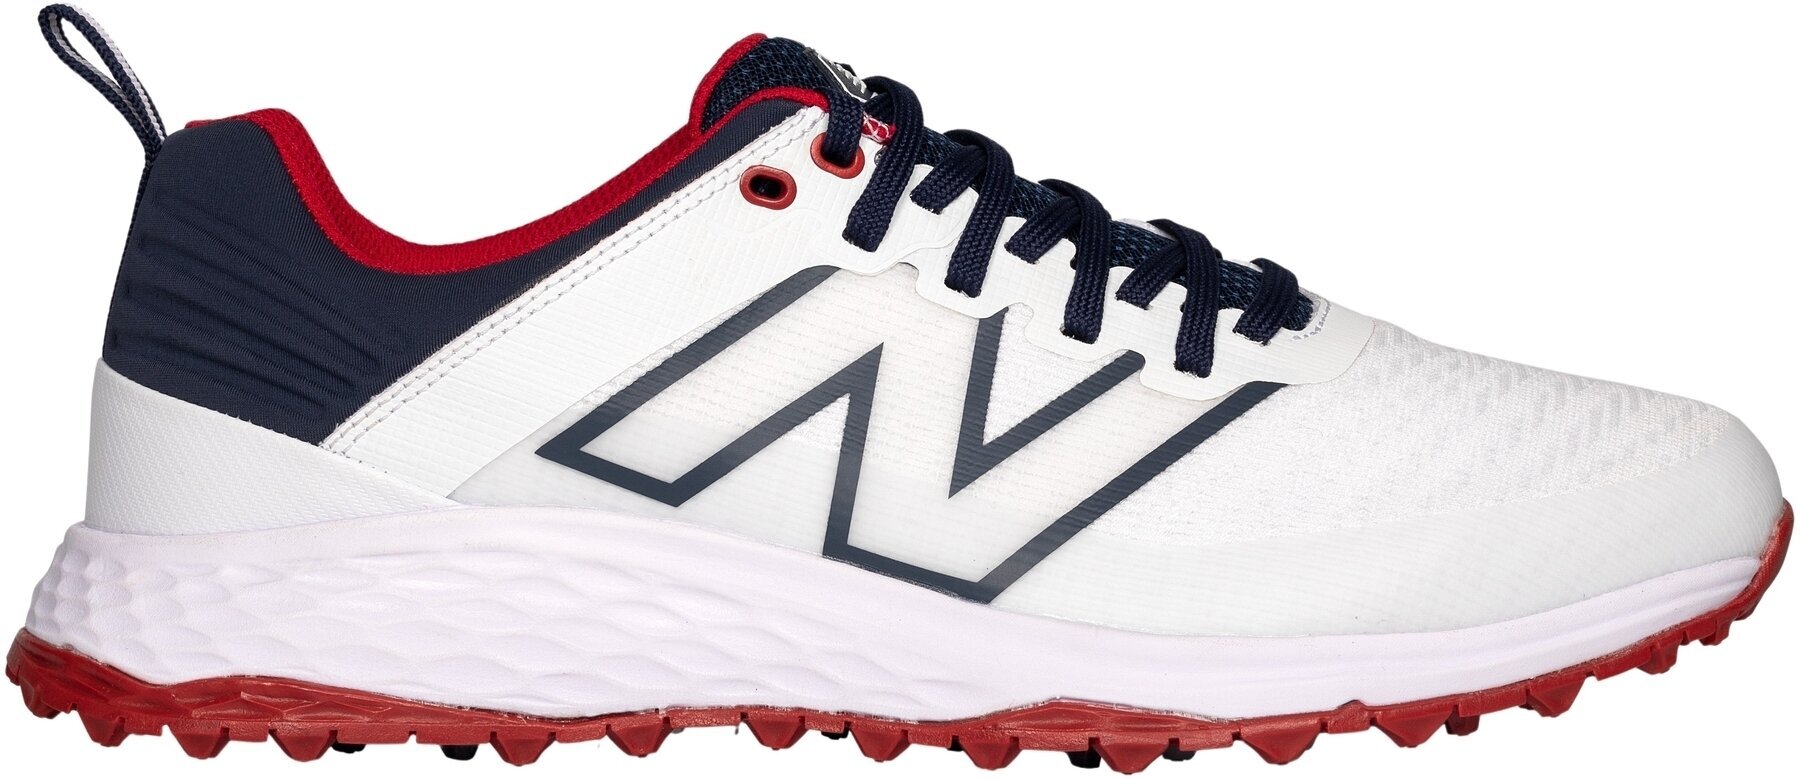 Men's golf shoes New Balance Contend Mens Golf Shoes White/Navy 44,5